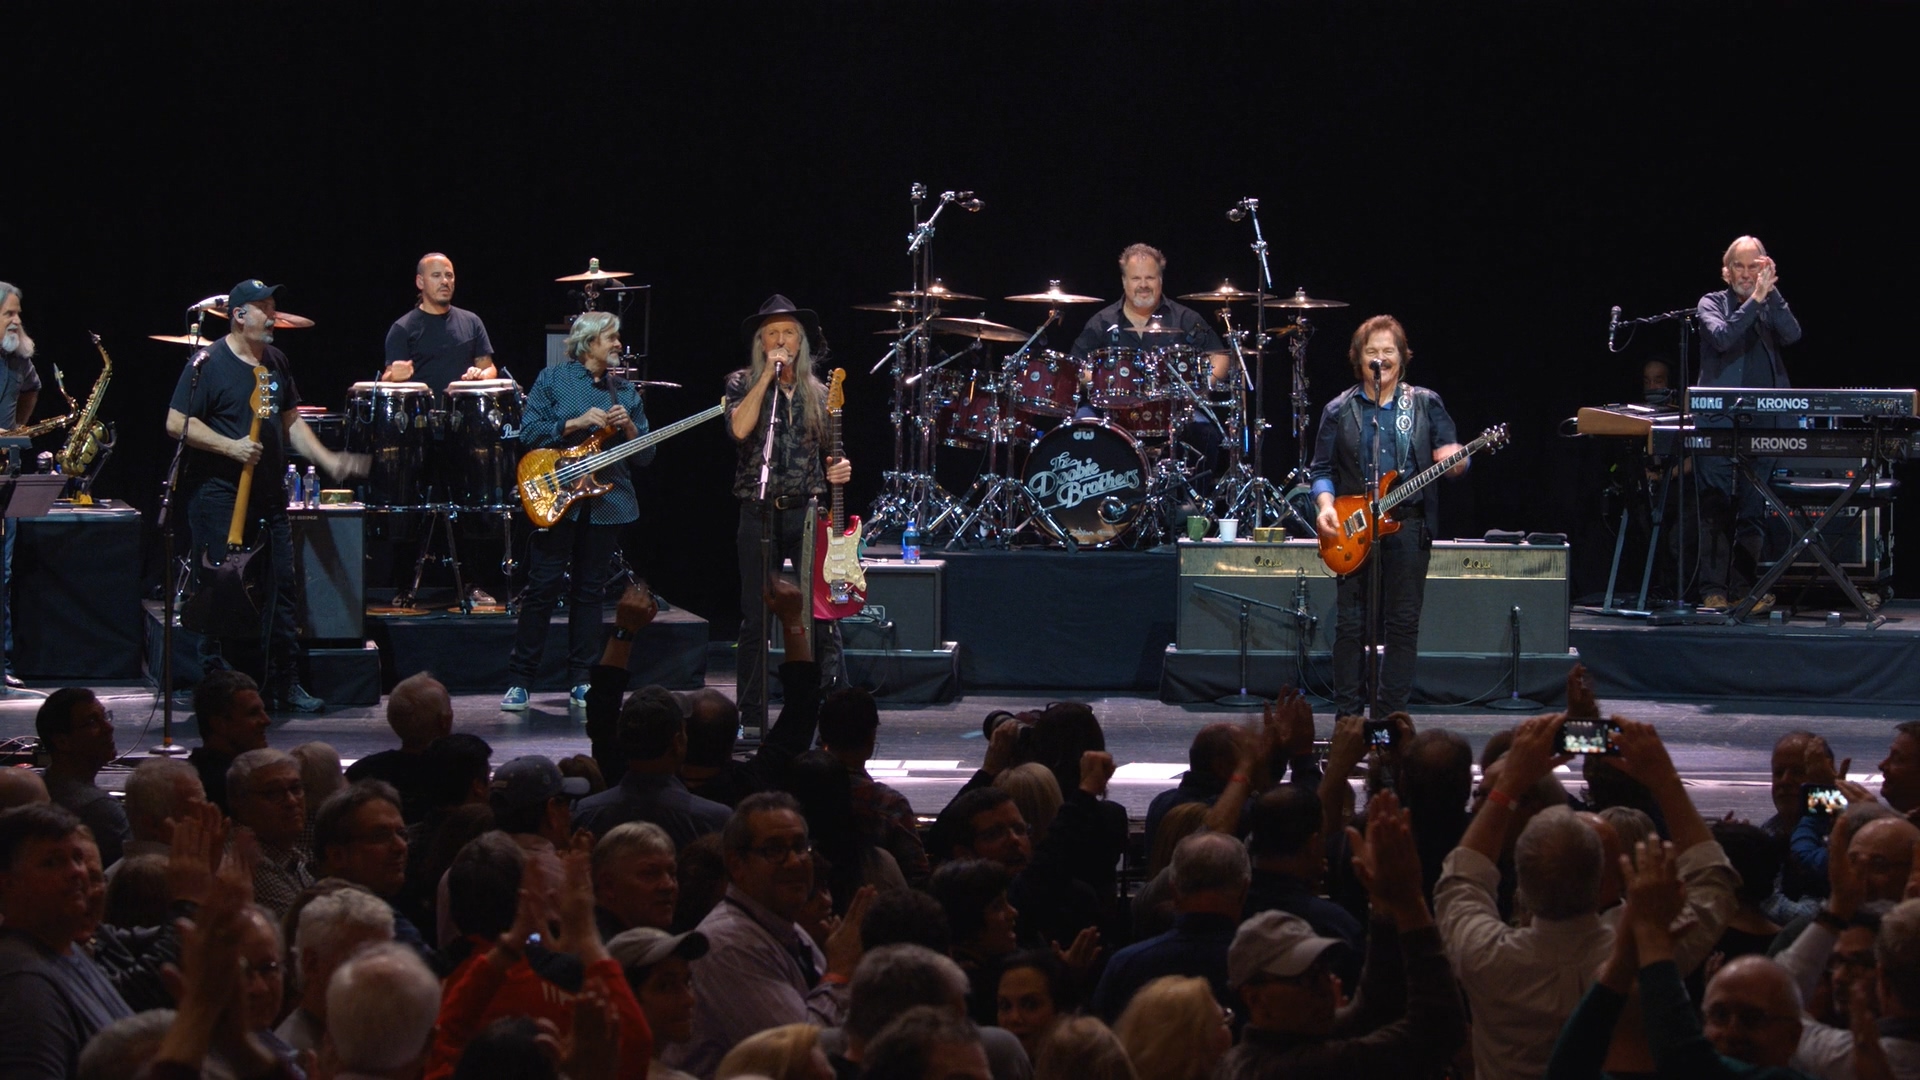 The Doobie Brothers Live From The Beacon Theatre Bluray 1080p DTS-HD MA 5.1_20190702_181135.362.jpg